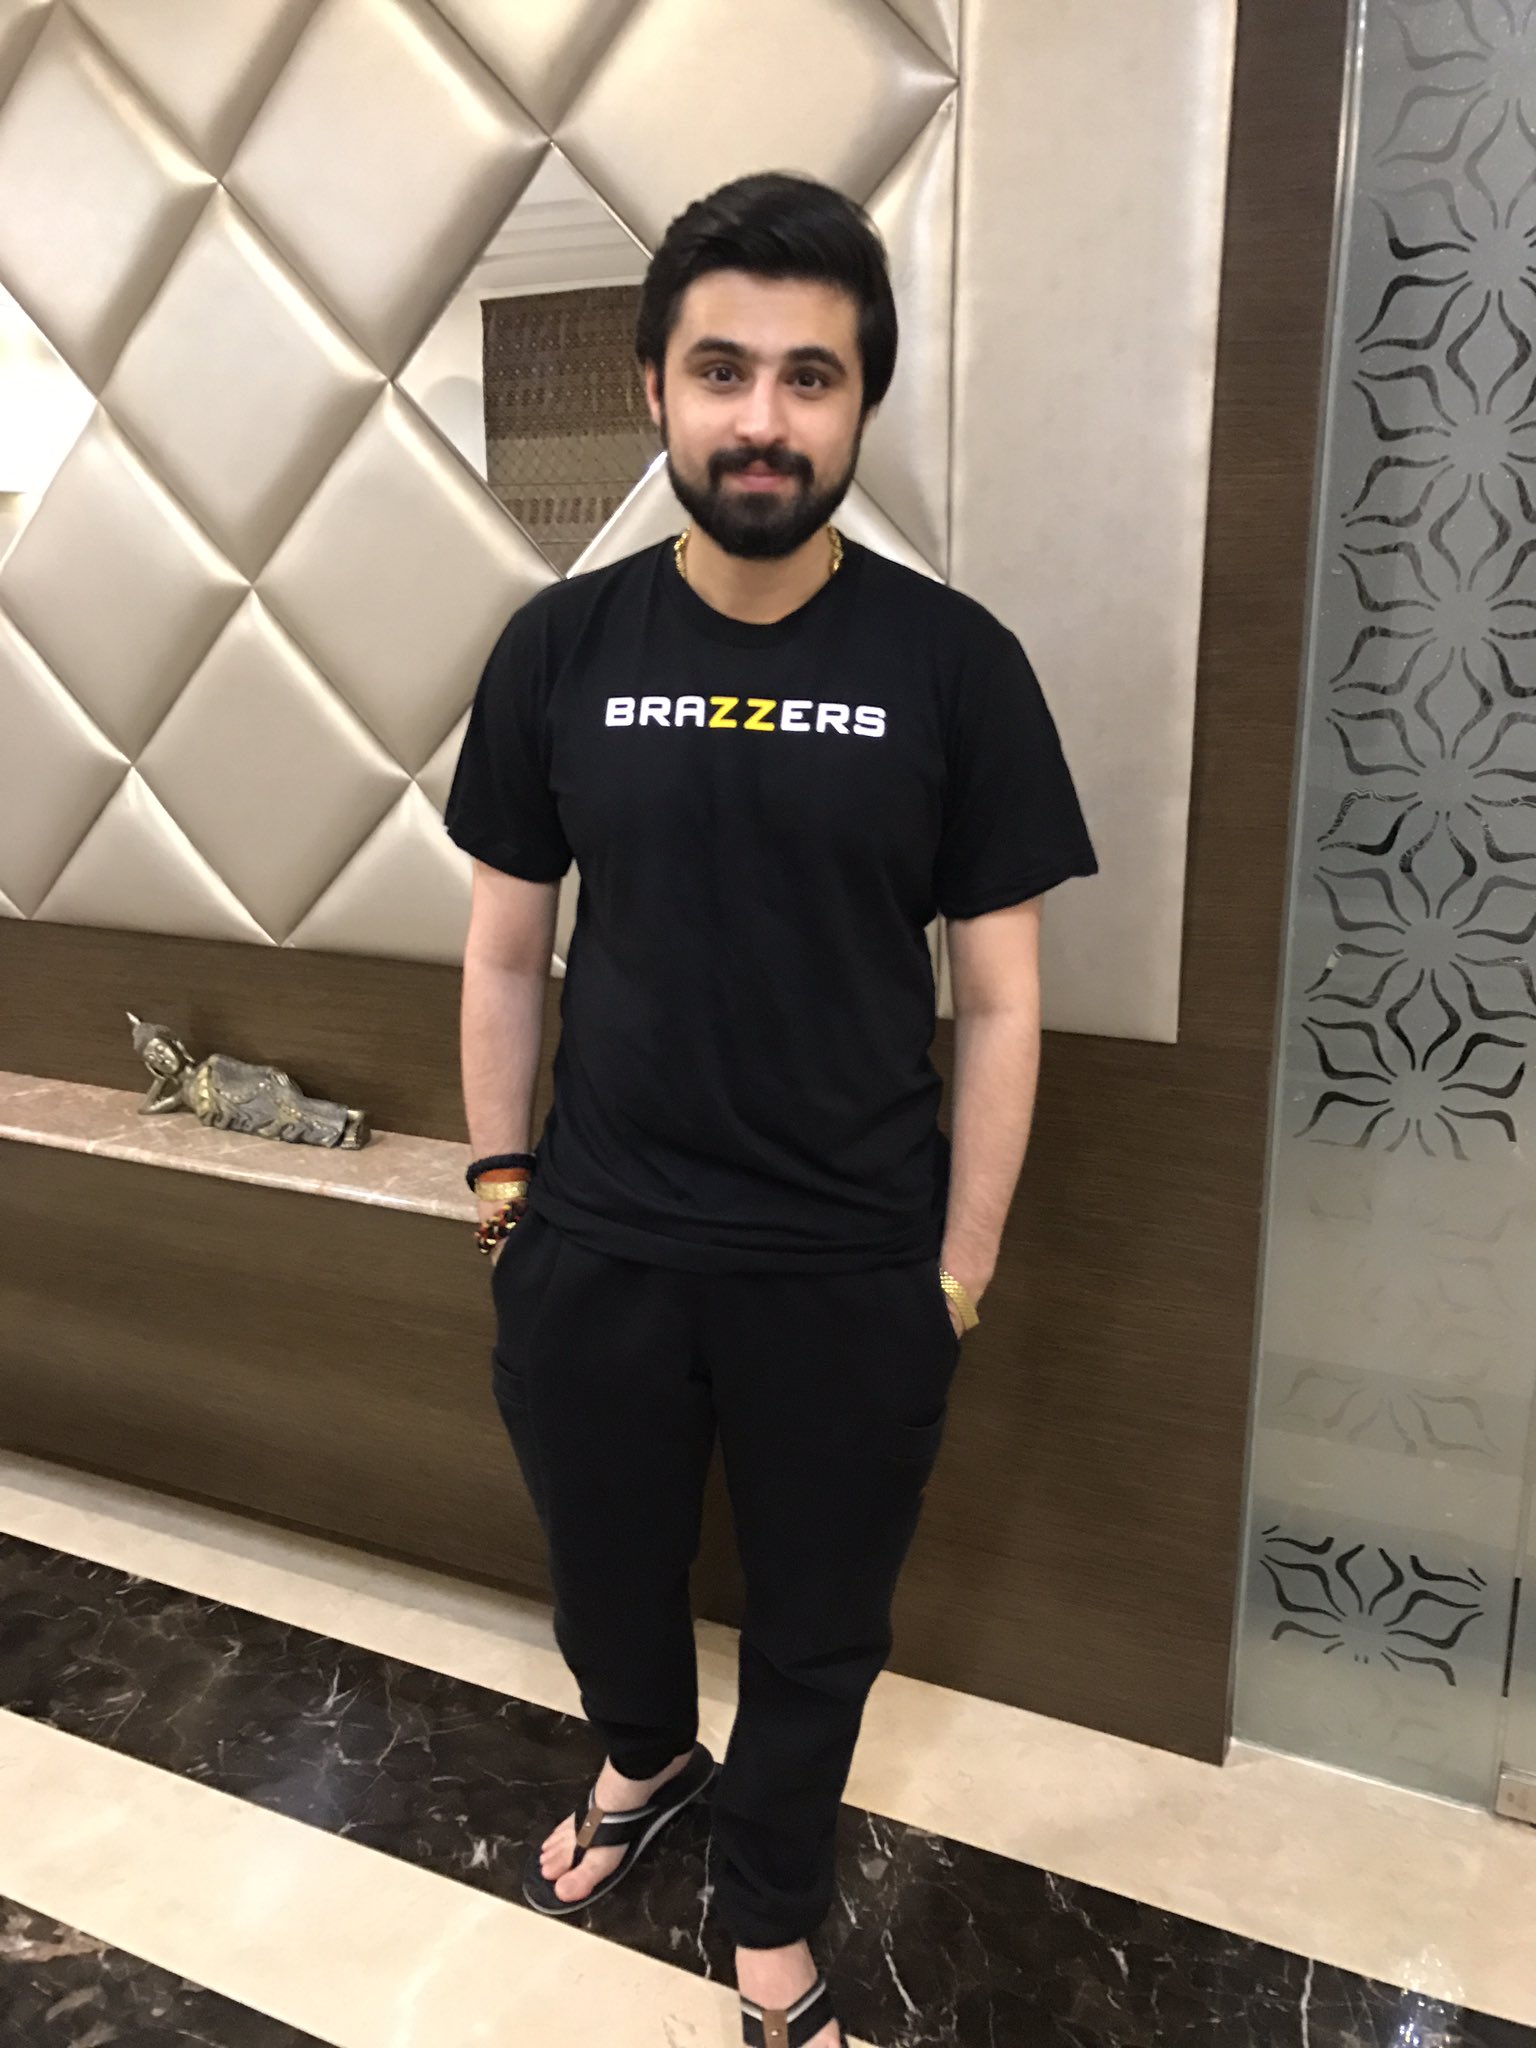 Perfervid Sprællemand ære siddhant mehrotra on Twitter: "Thank you @Brazzers for this lovely tshirt  https://t.co/R4CHAlVVgp" / Twitter